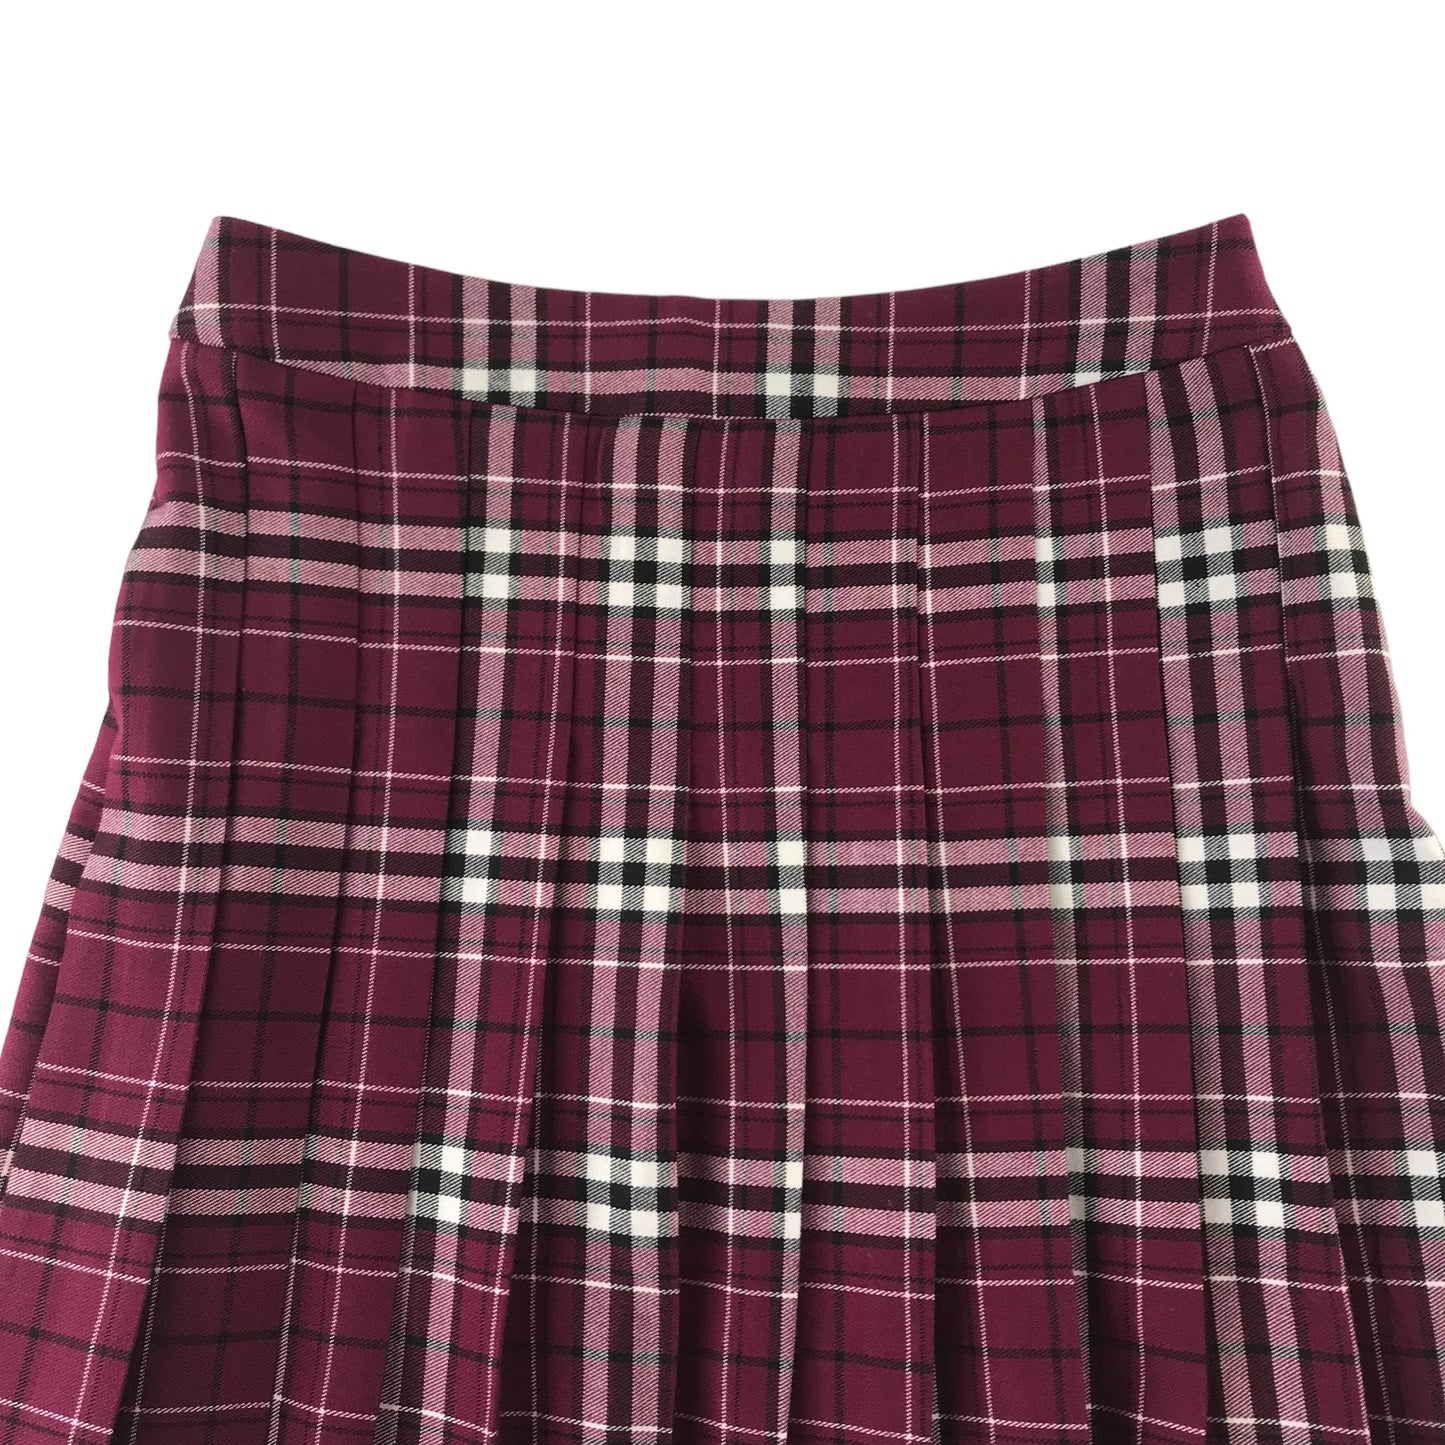 New Look Skirt Age 13 Purple Shade Burgundy and White Checked with Pleats